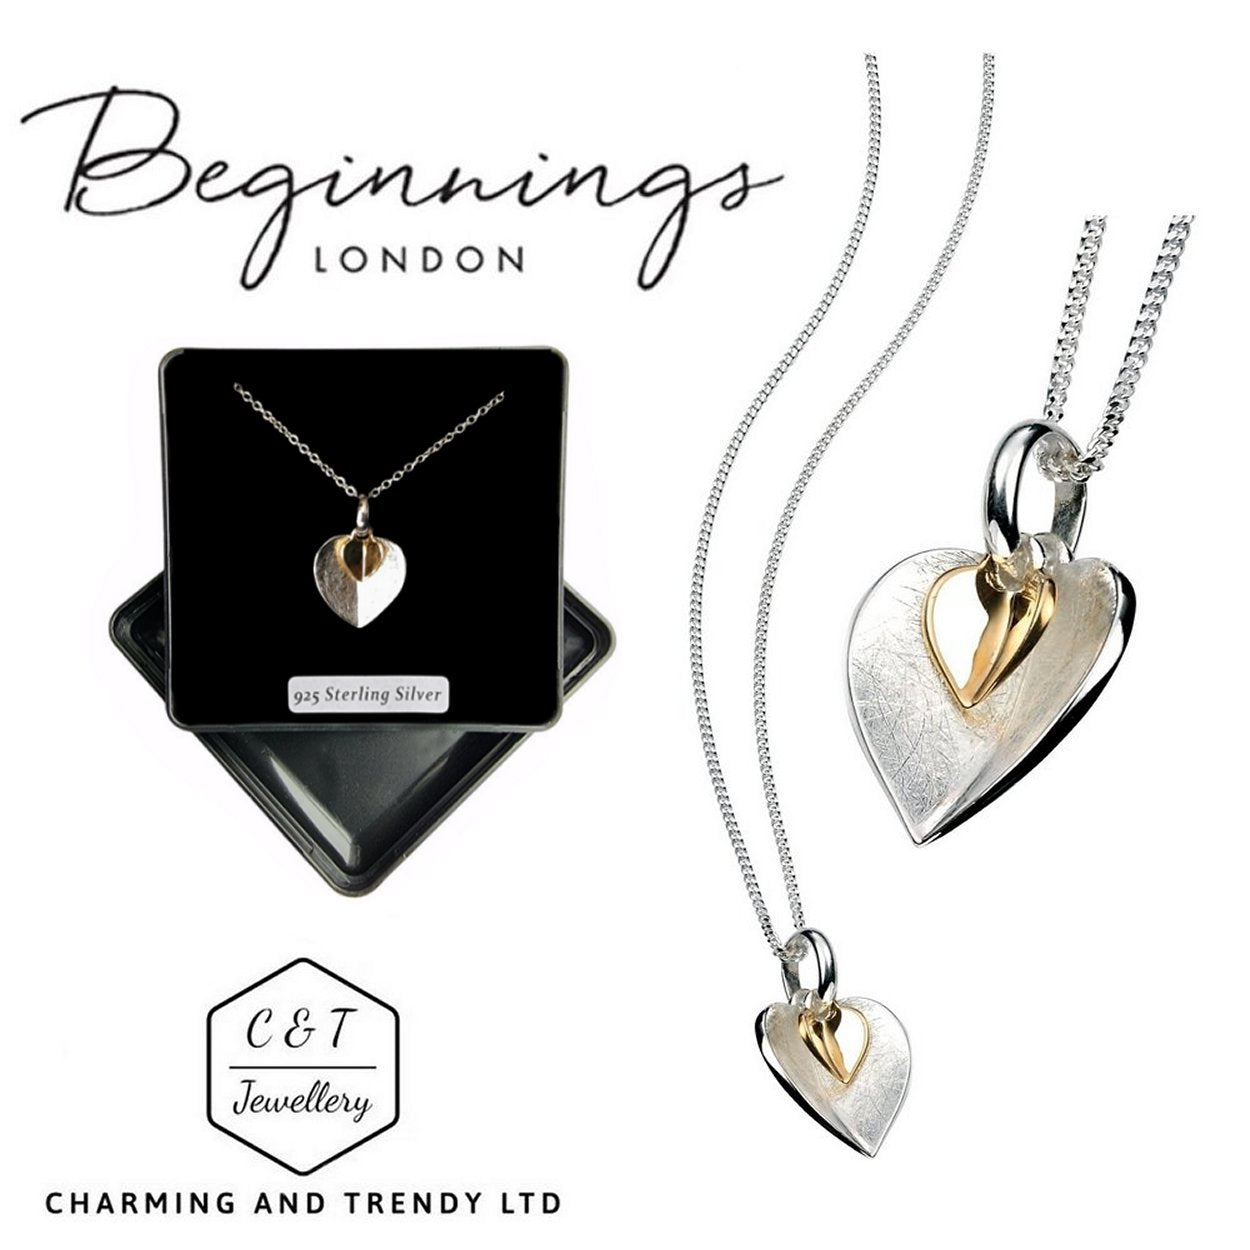 925 Sterling Silver & Gold Plated Double Heart Pendant & Chain - Gift Boxed - Charming And Trendy Ltd